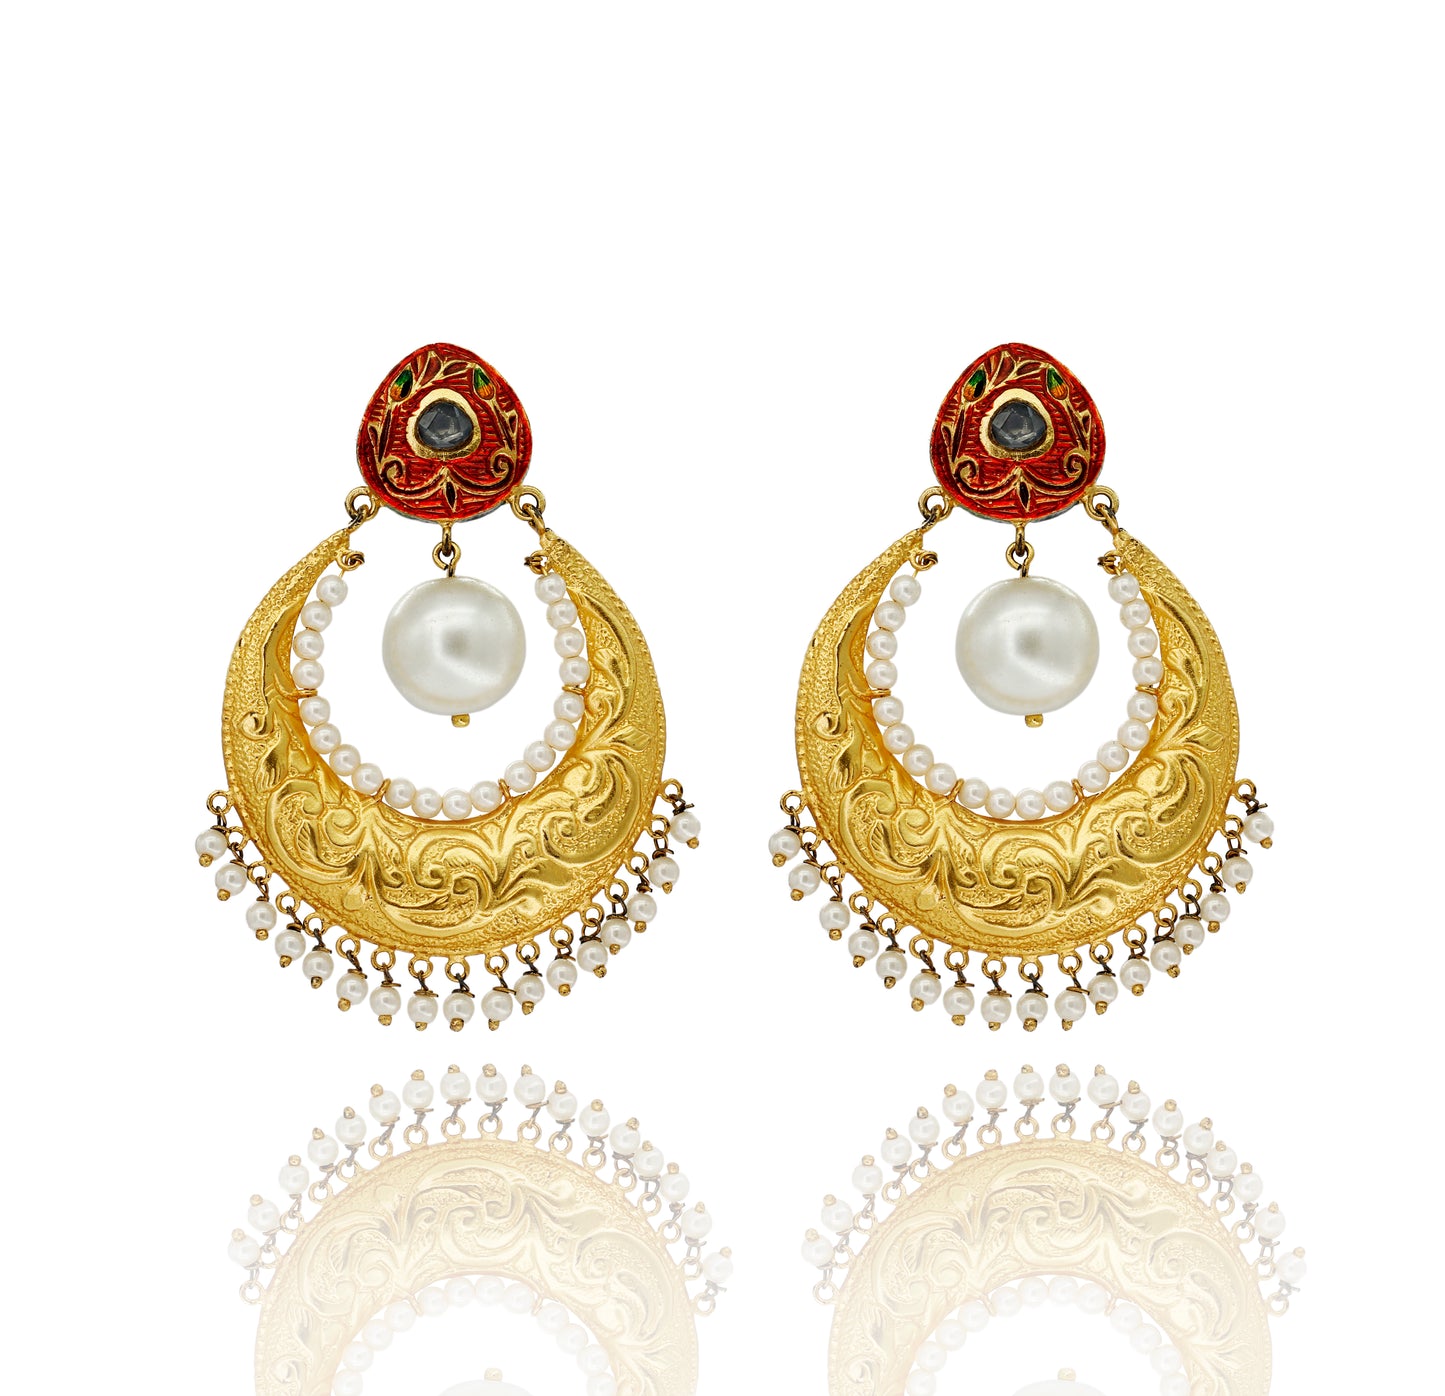 EARRINGS:-92.5 STERLING SILVER GOLD PLATED WITH ENEMAL & CRYSTAL, CULTURED & FRESH WATER PEARLS.